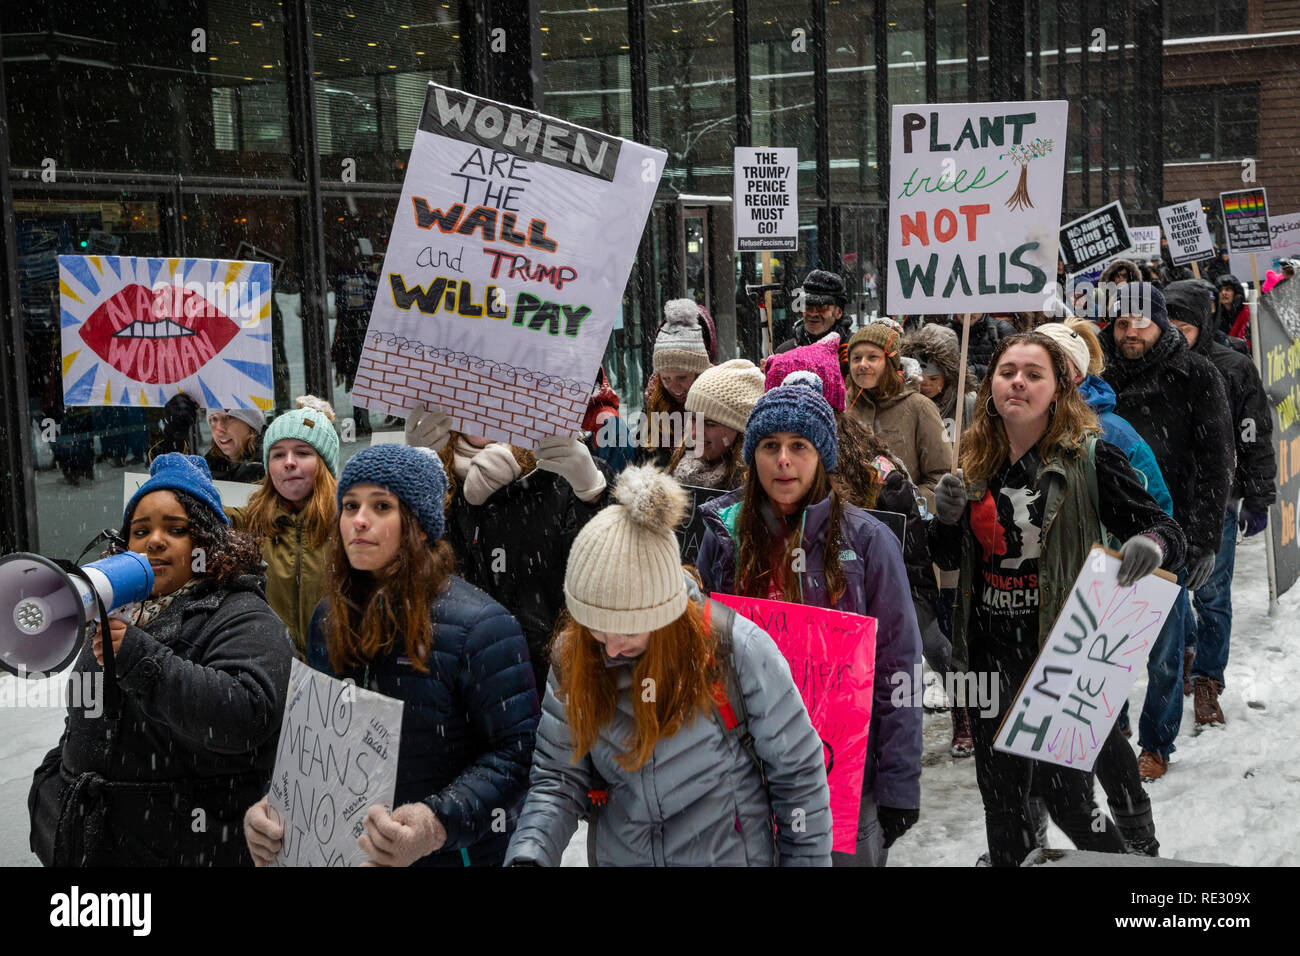 Chicago, USA. 19th Jan 2019. In the face of a fierce winter snowstorm, Chicago’s “Young Women’s March” brought a small but spirited crowd to Federal Plaza on January 19th to proclaim the power of women and display their rejection of President Donald Trump and his policies. Assembling at 10 am on a snowy Saturday, the group made impassioned speeches about issues facing young women today, and then marched around the plaza carrying mostly homemade signs and chanting resistance to the current administration. Credit: Matthew Kaplan/Alamy Live News Stock Photo